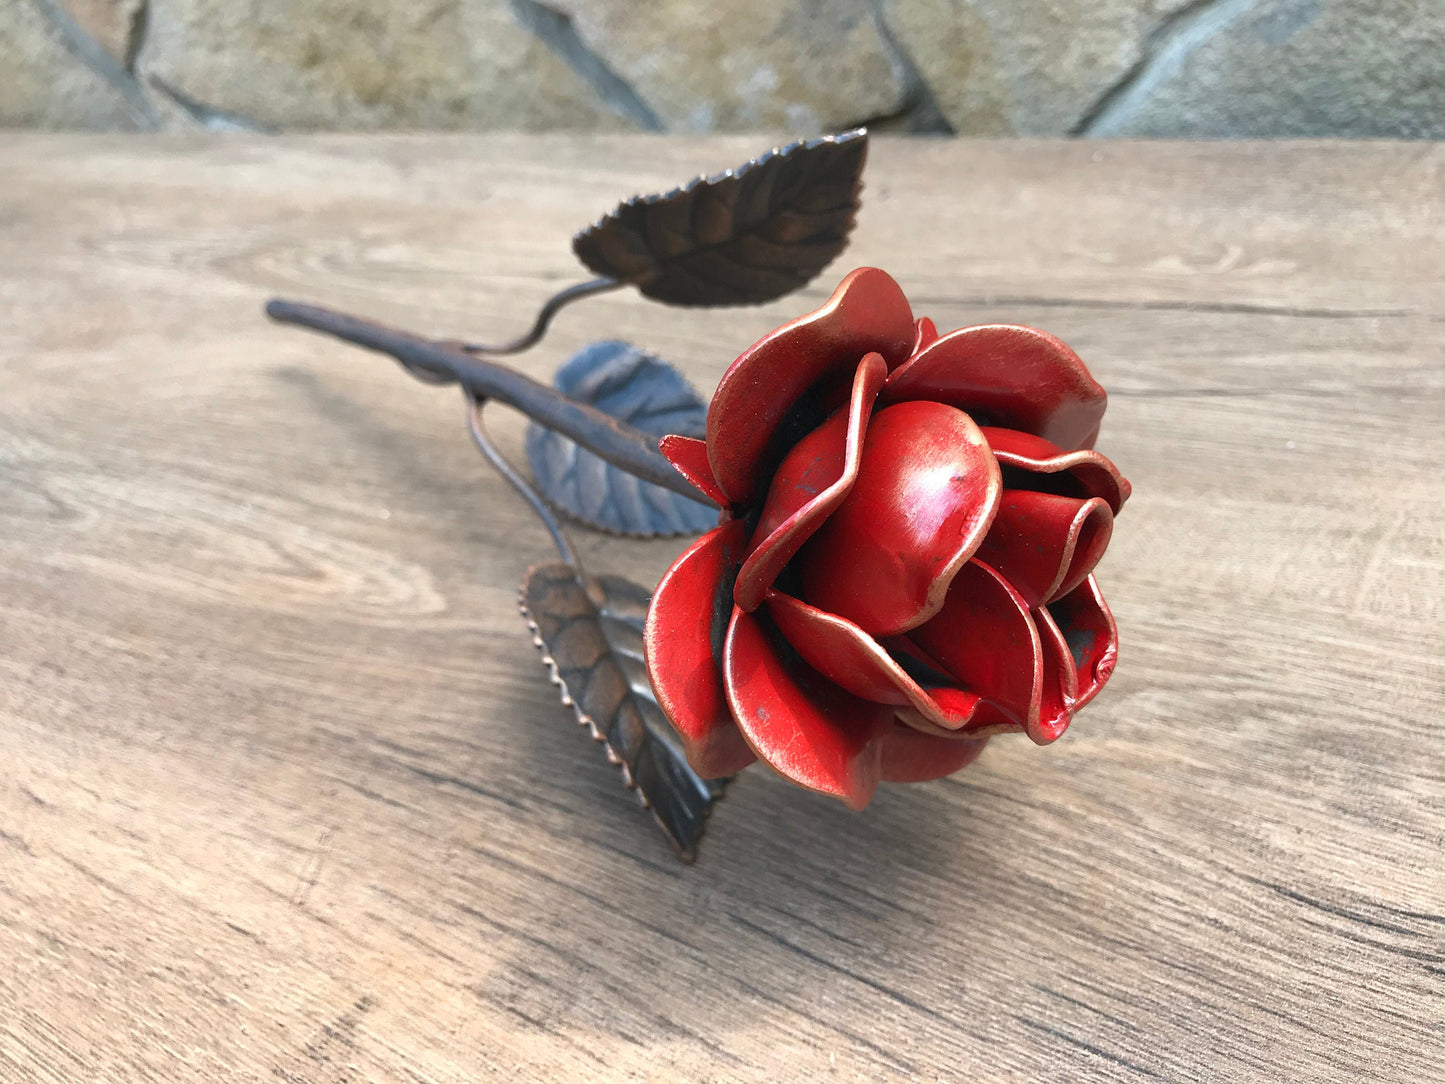 Metal rose, 6th anniversary gift, iron anniversary, hand forged rose, metal sculpture, iron rose, metal roses, steel rose, iron gift for her